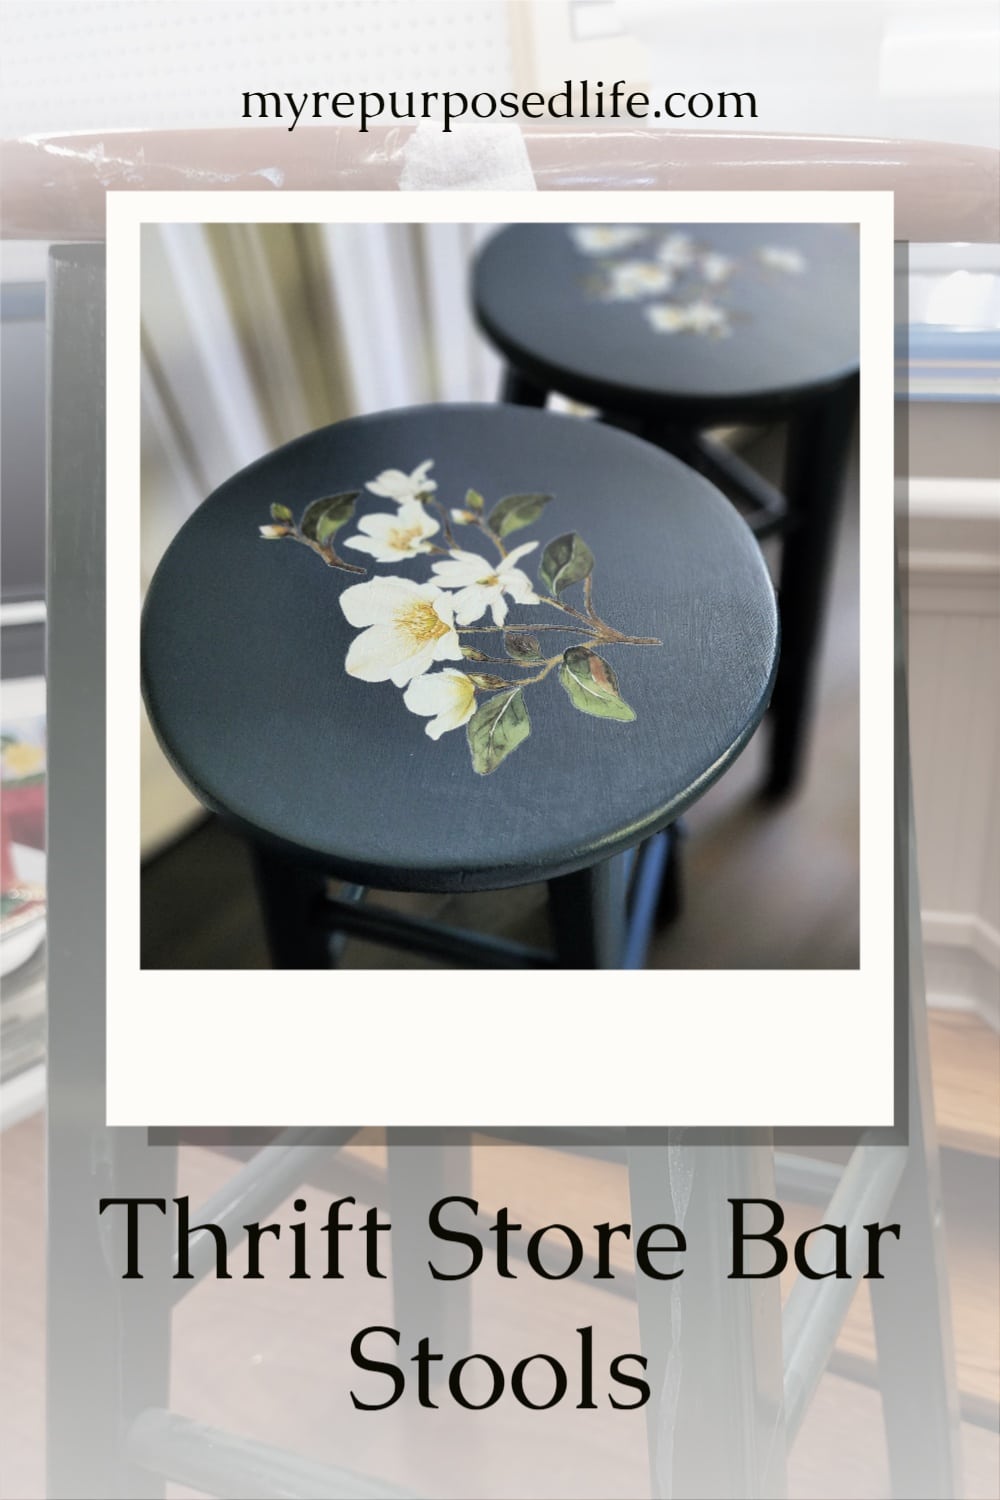 How to repair, paint and embellish a pair of broken down thrift store bar stools. These Navy blue bar stools get a great new look, after a decoupage failure. #MyRepurposedLife #upcycle #thriftstore #barstools #deocoupage #failure #rub-on #transfer via @repurposedlife